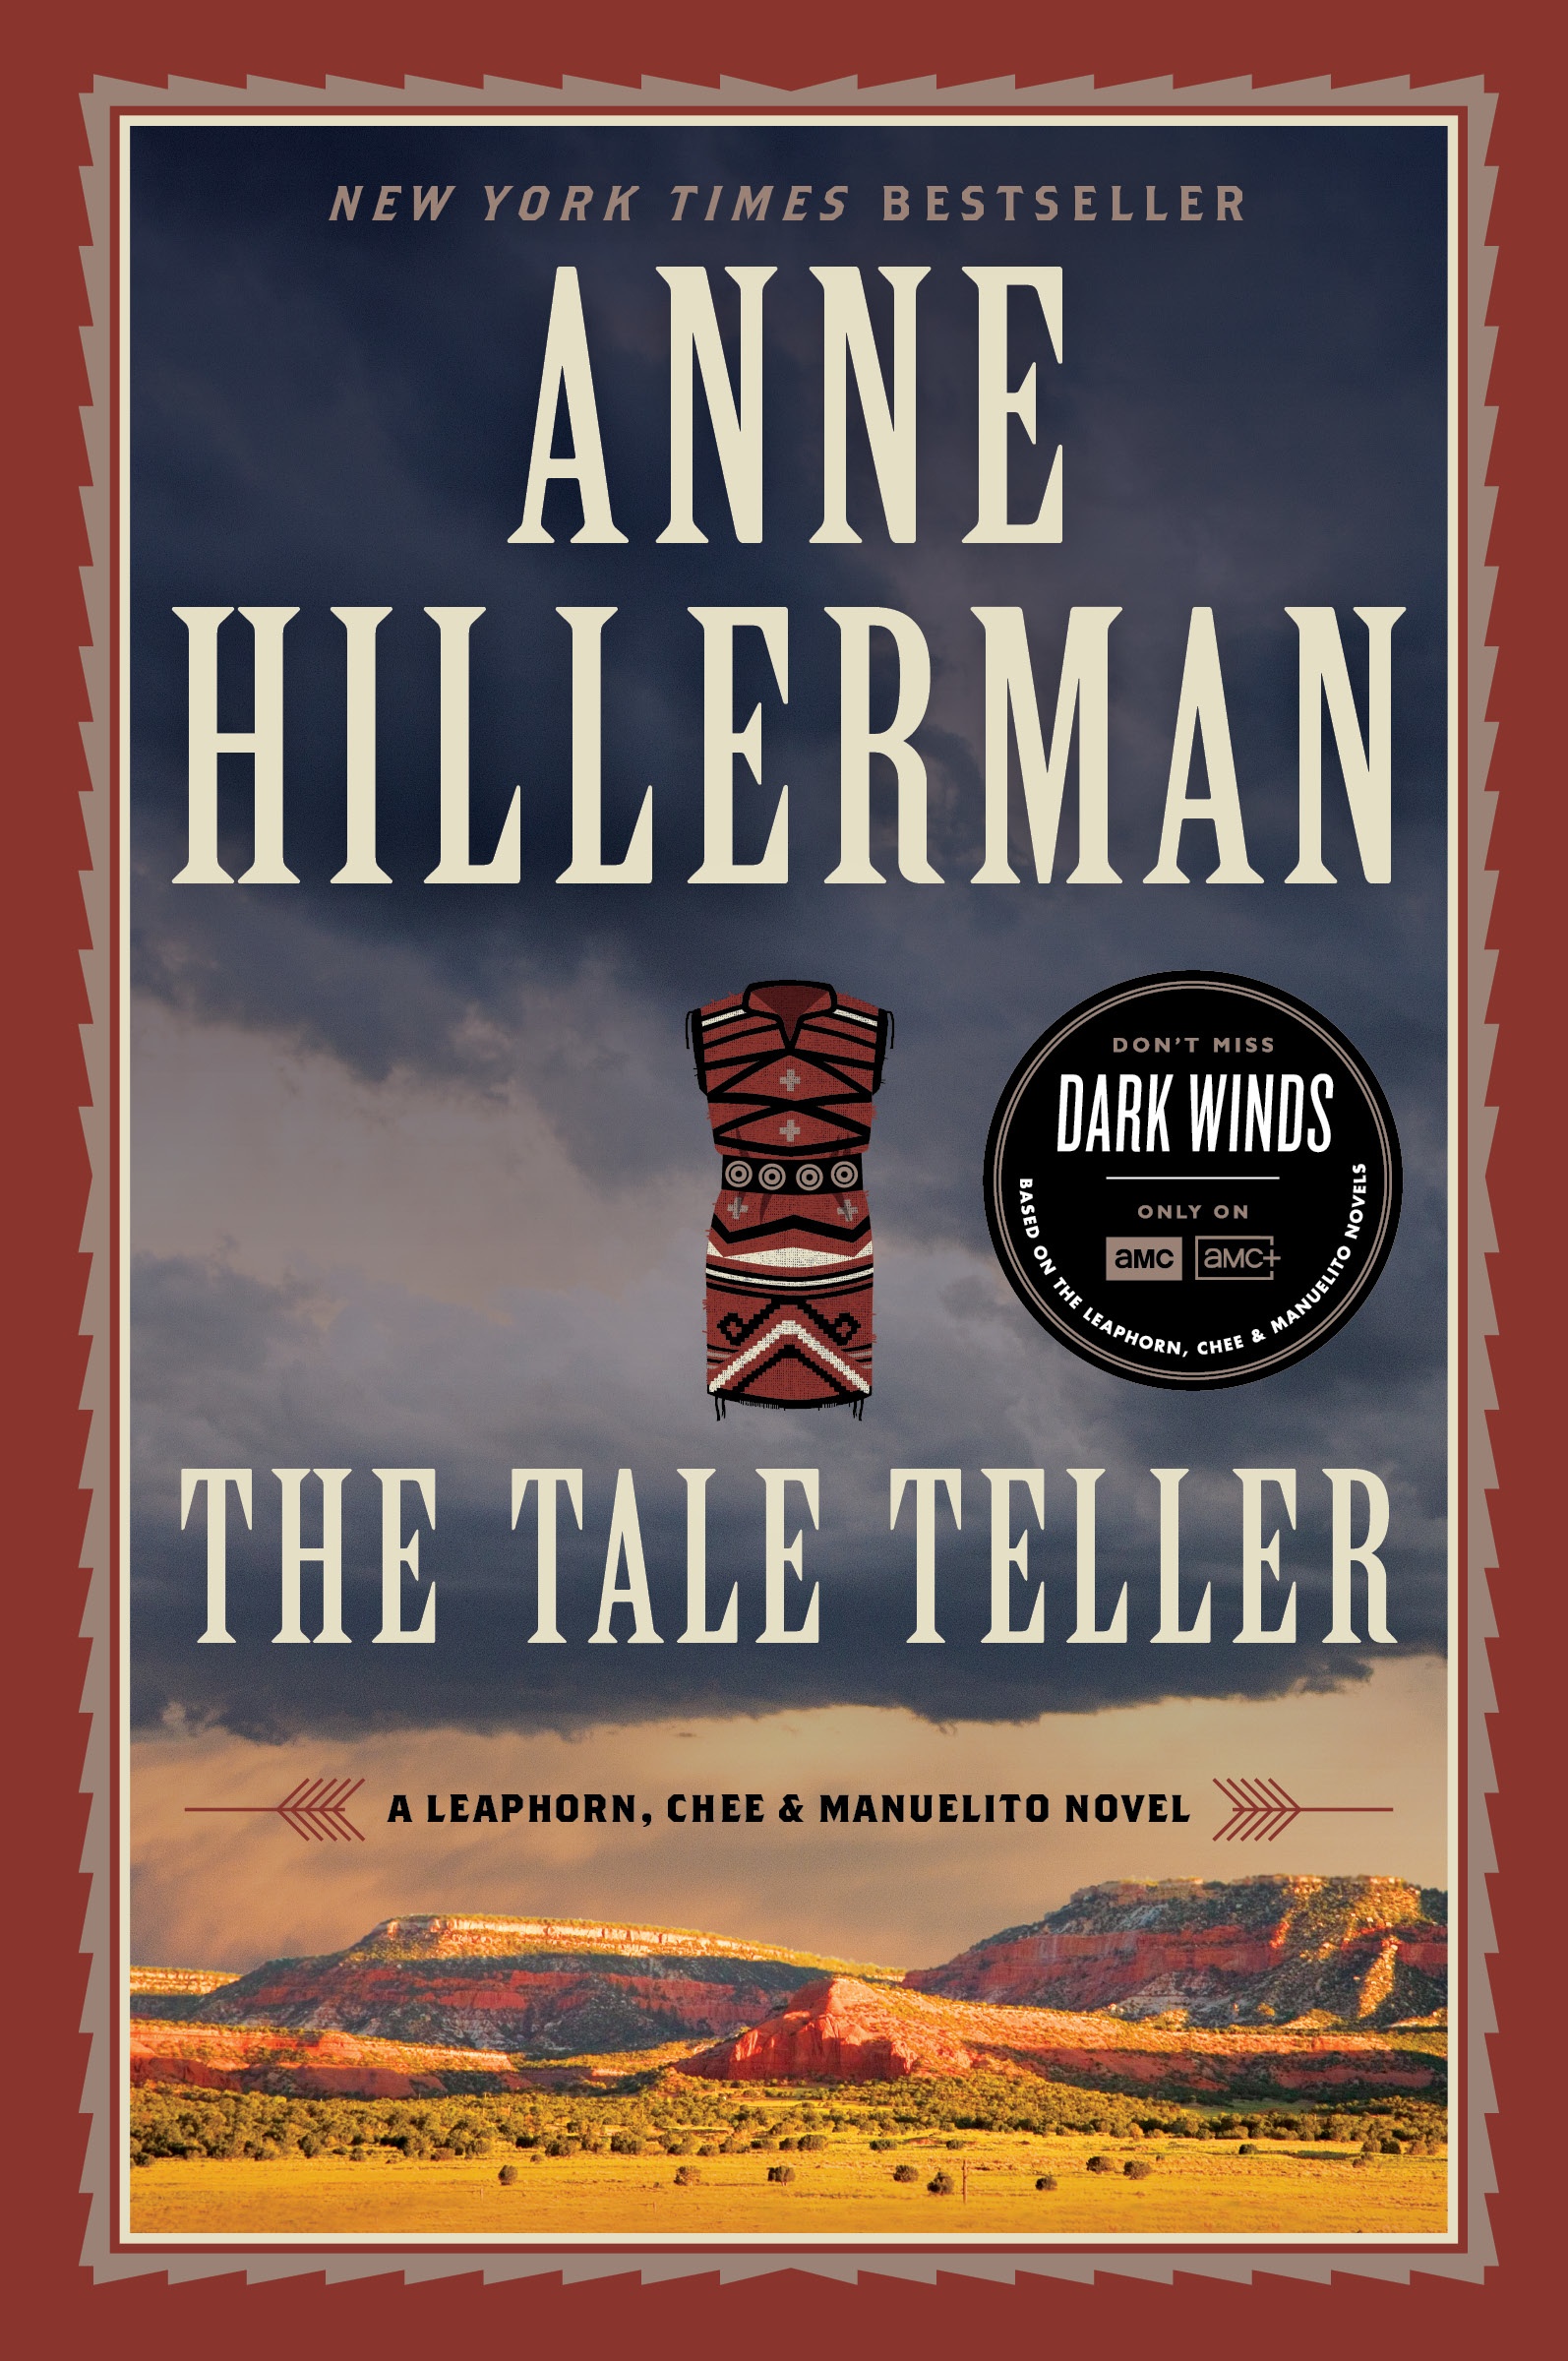 The tale teller cover image